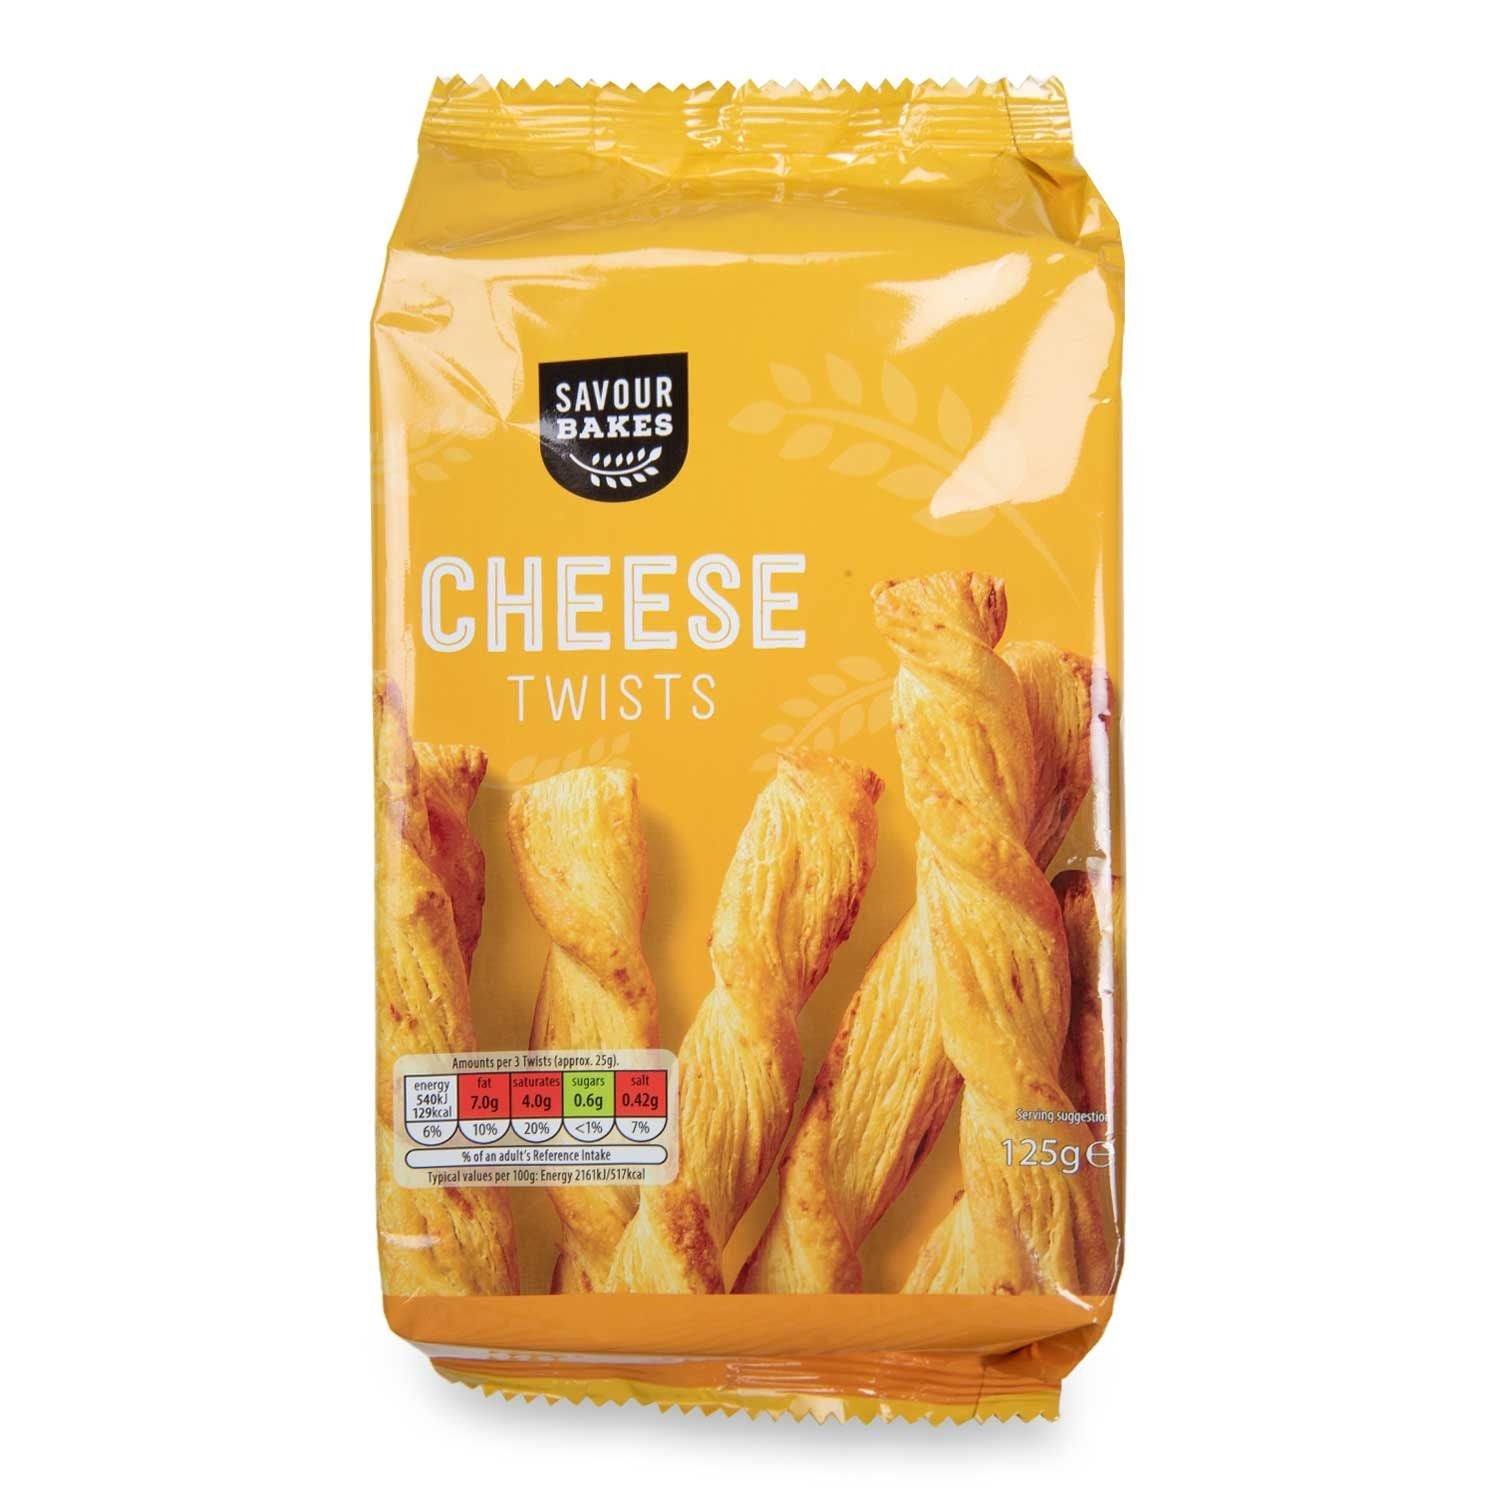 Savour Bakes Cheese Twists 125g